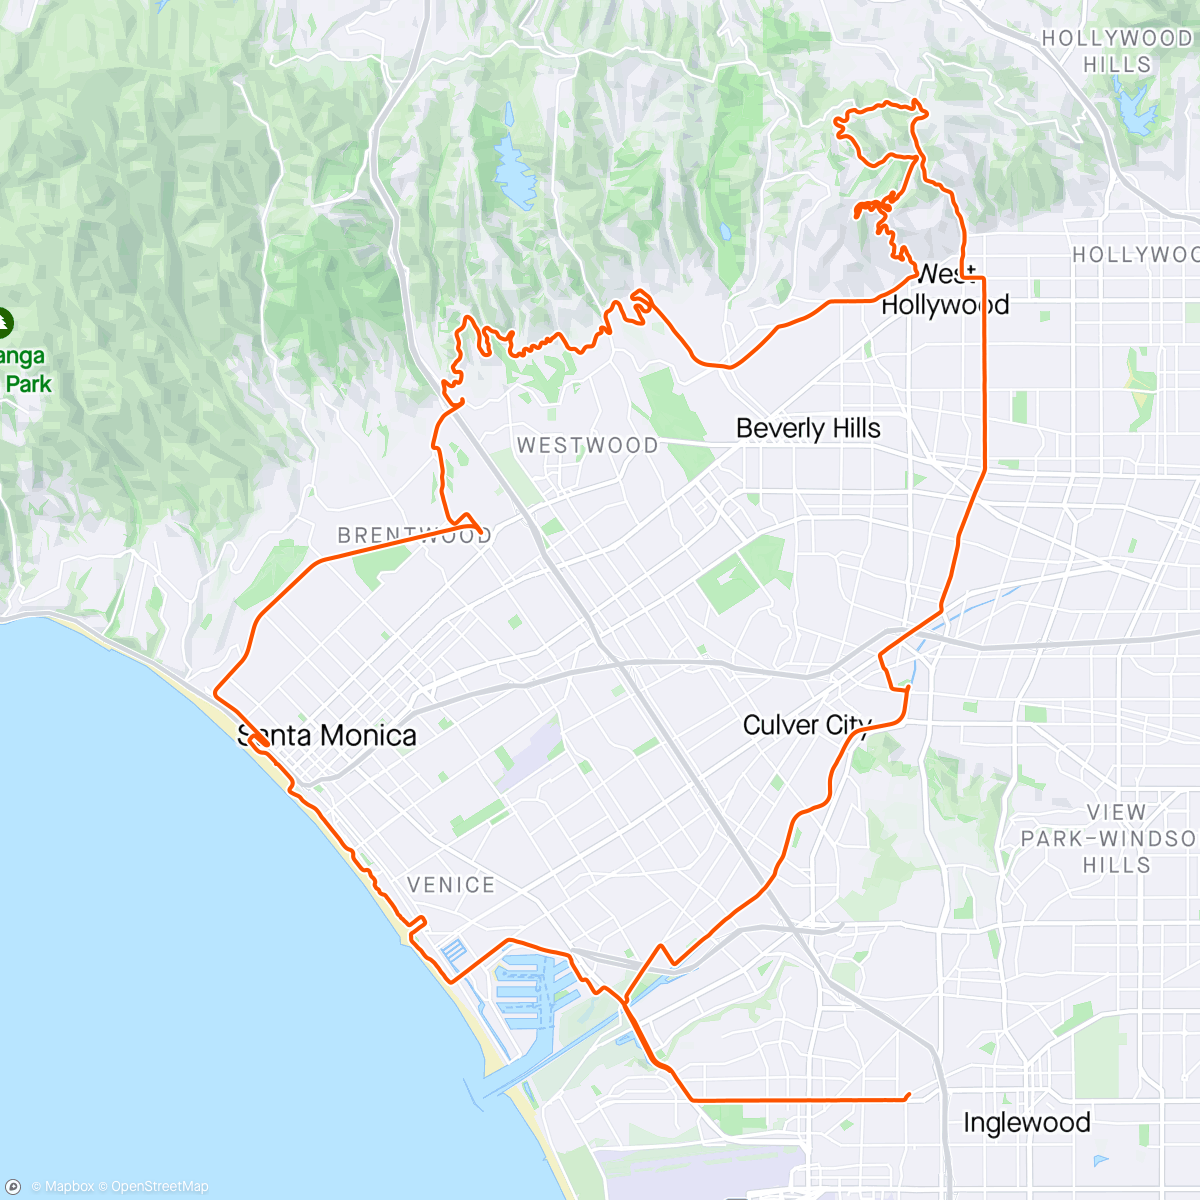 Map of the activity, Lap of Hollywood hills n bel air